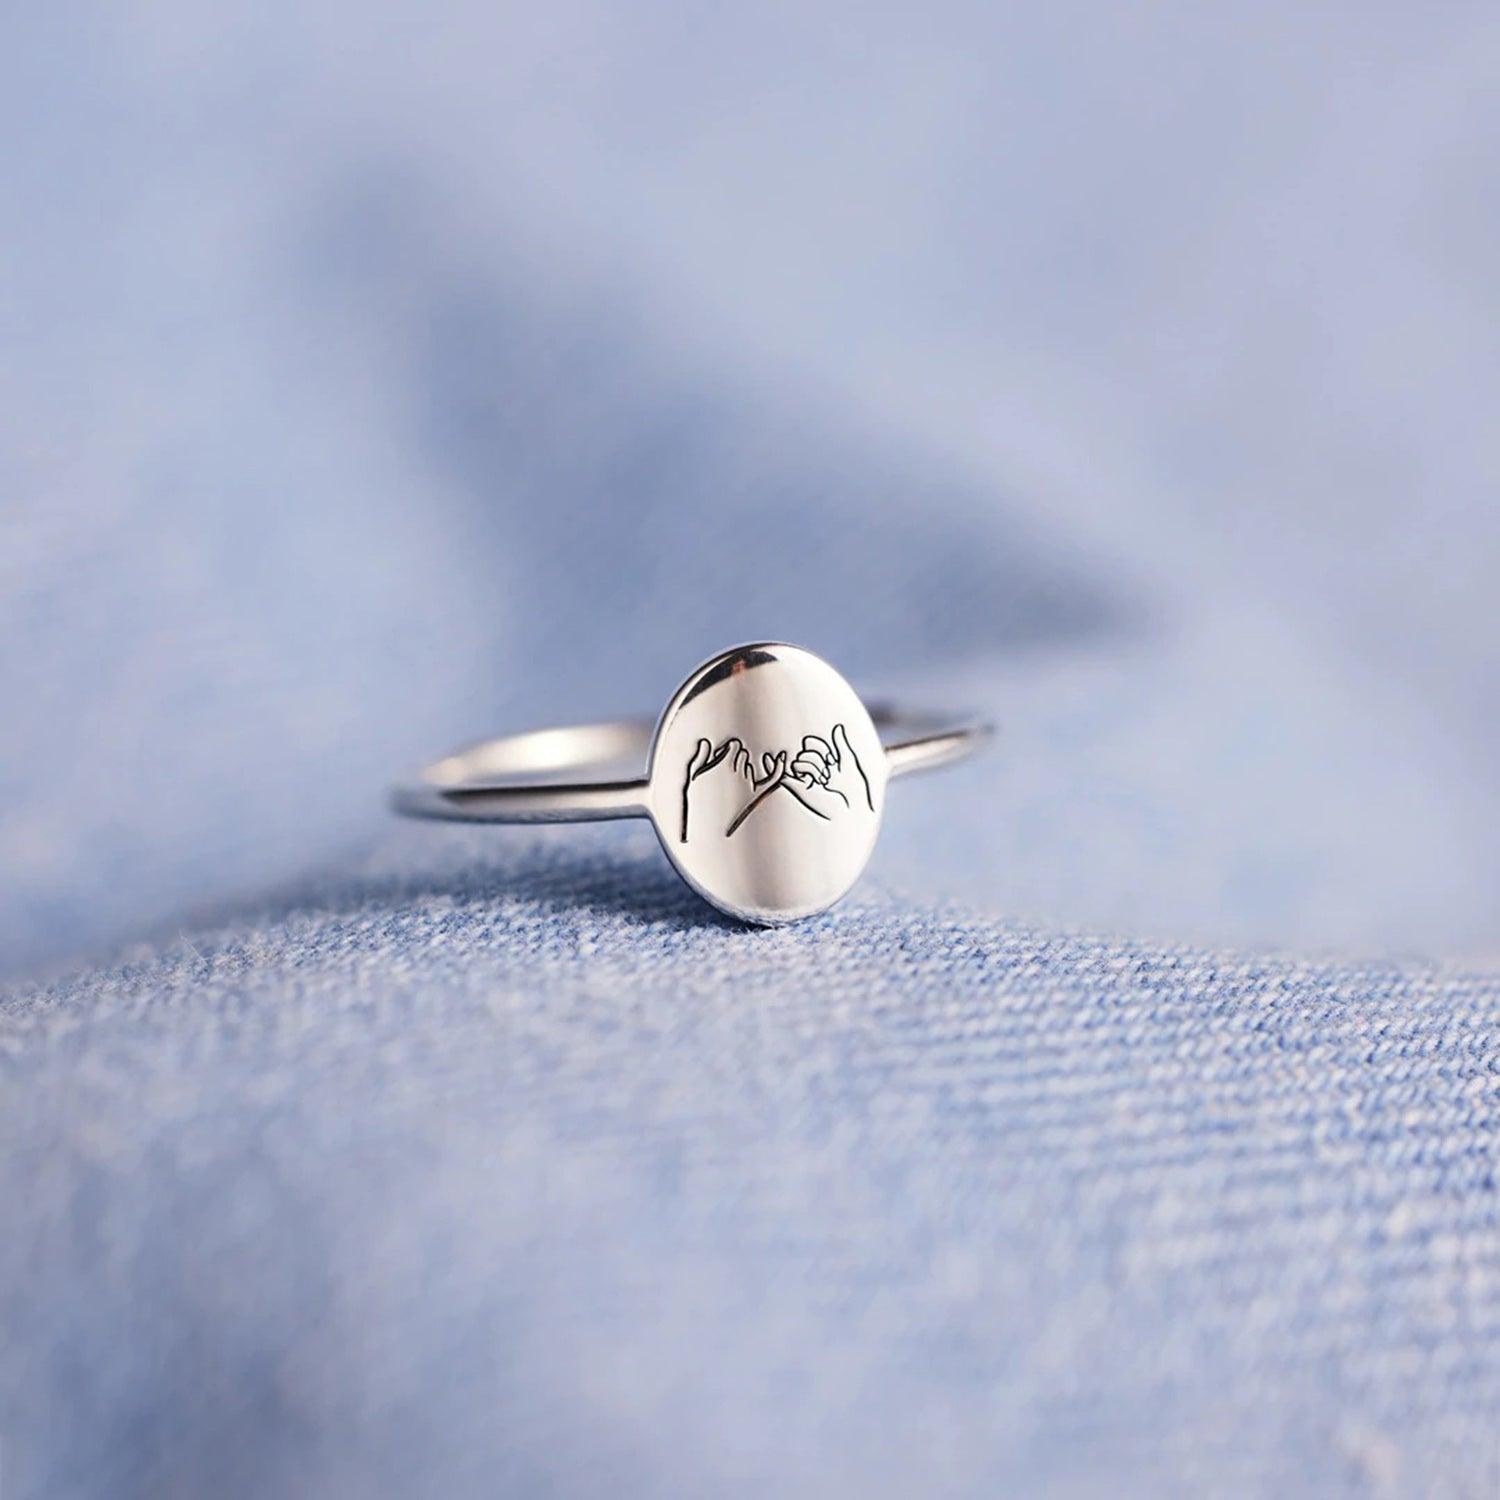 925 Sterling Silver Engraved Ring - 808Lush